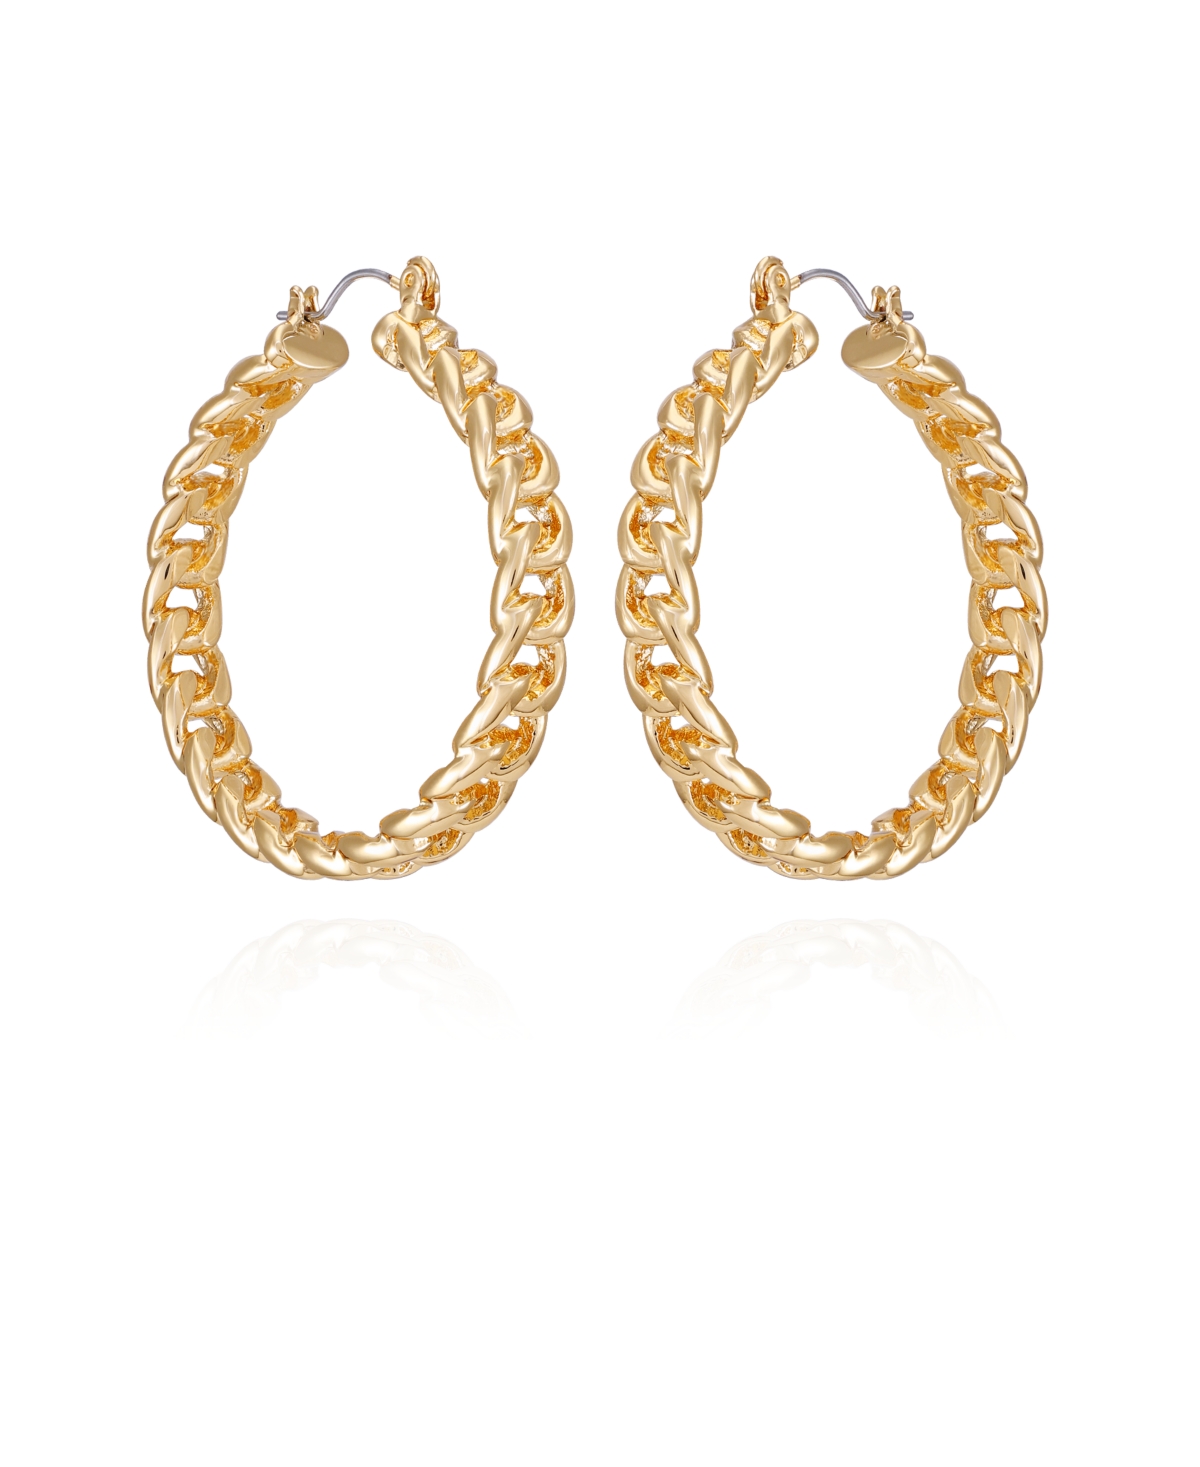 Gold Tone Textured Woven Hoop Earrings - Gold